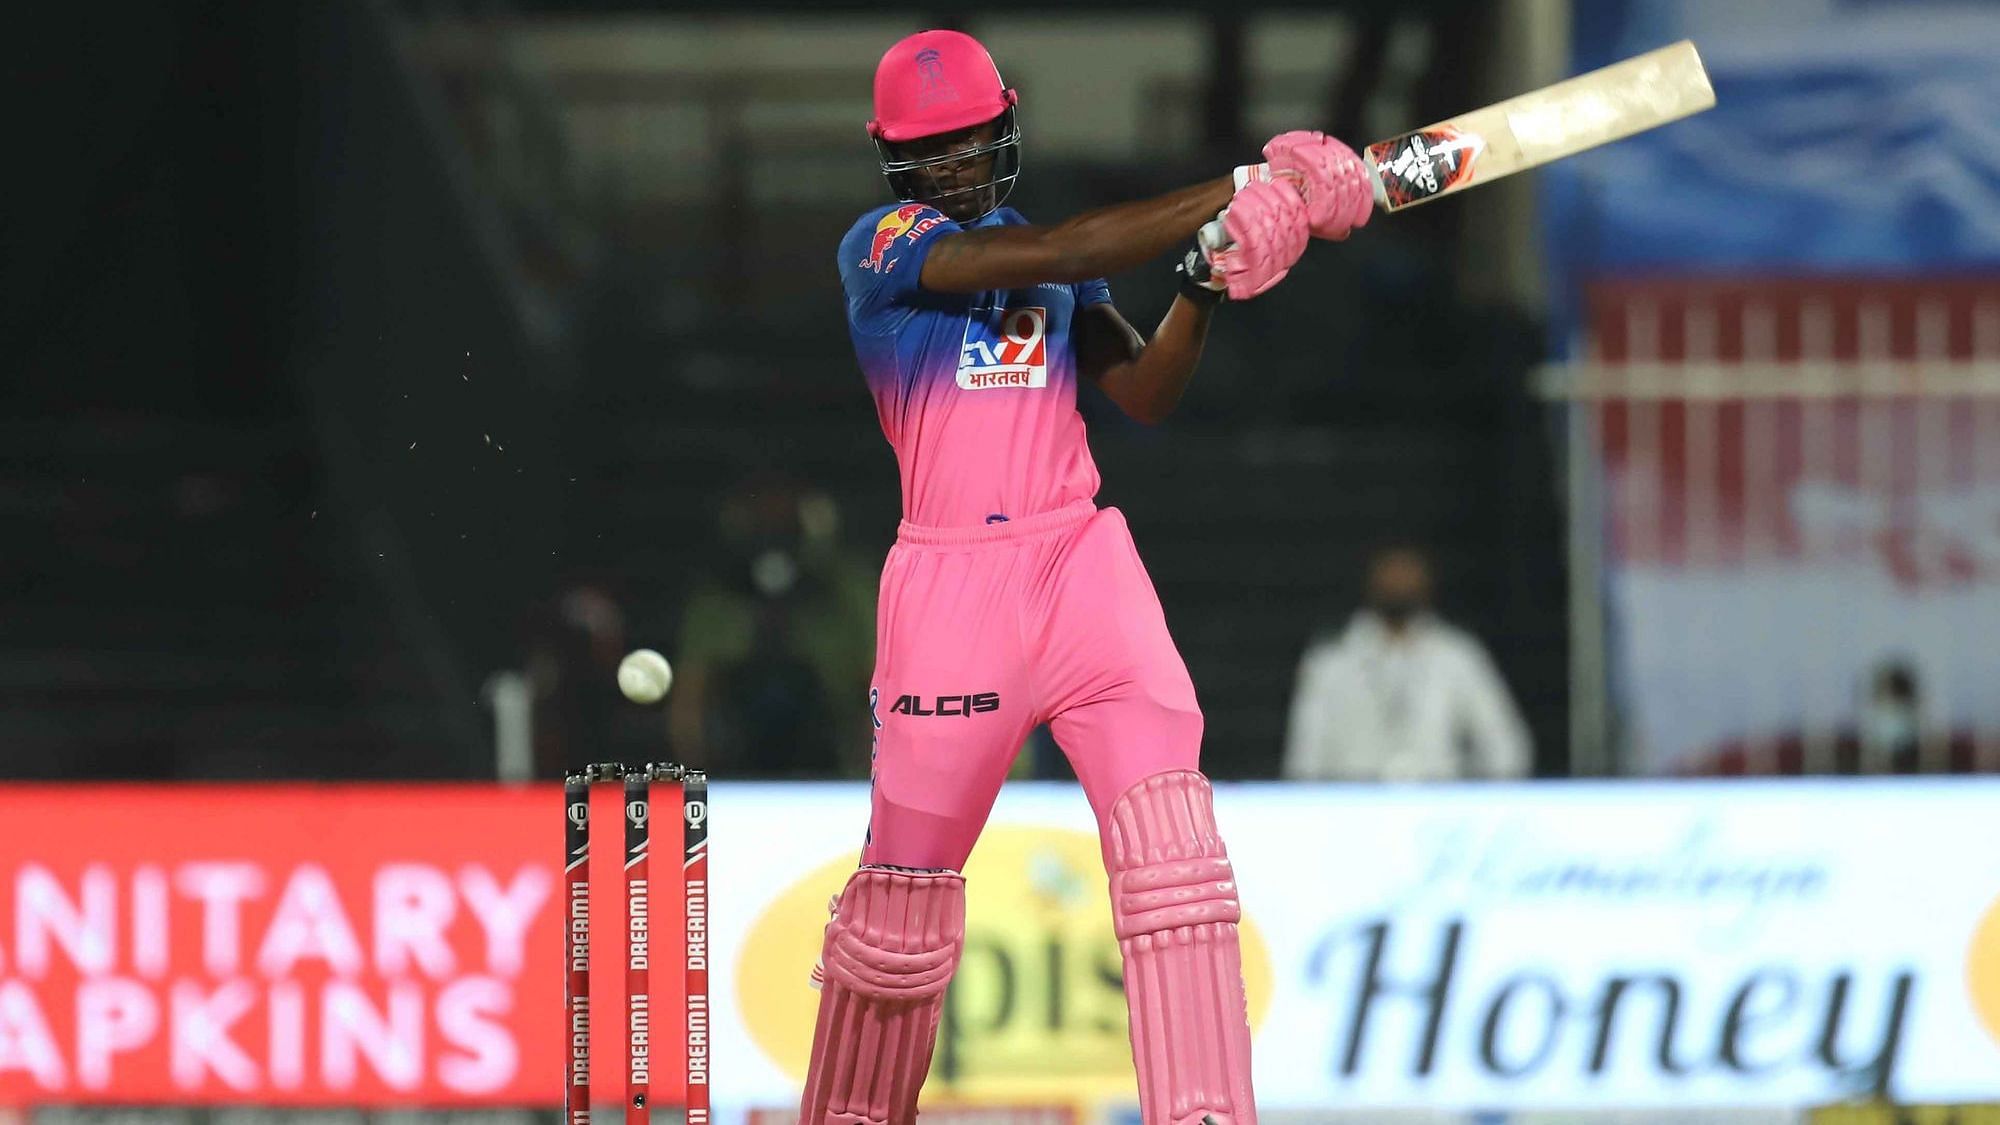 Rajasthan Royals’ Jofra Archer after coming in at 9, smashed 4 sixes in a row on his way to 27 off 8 balls